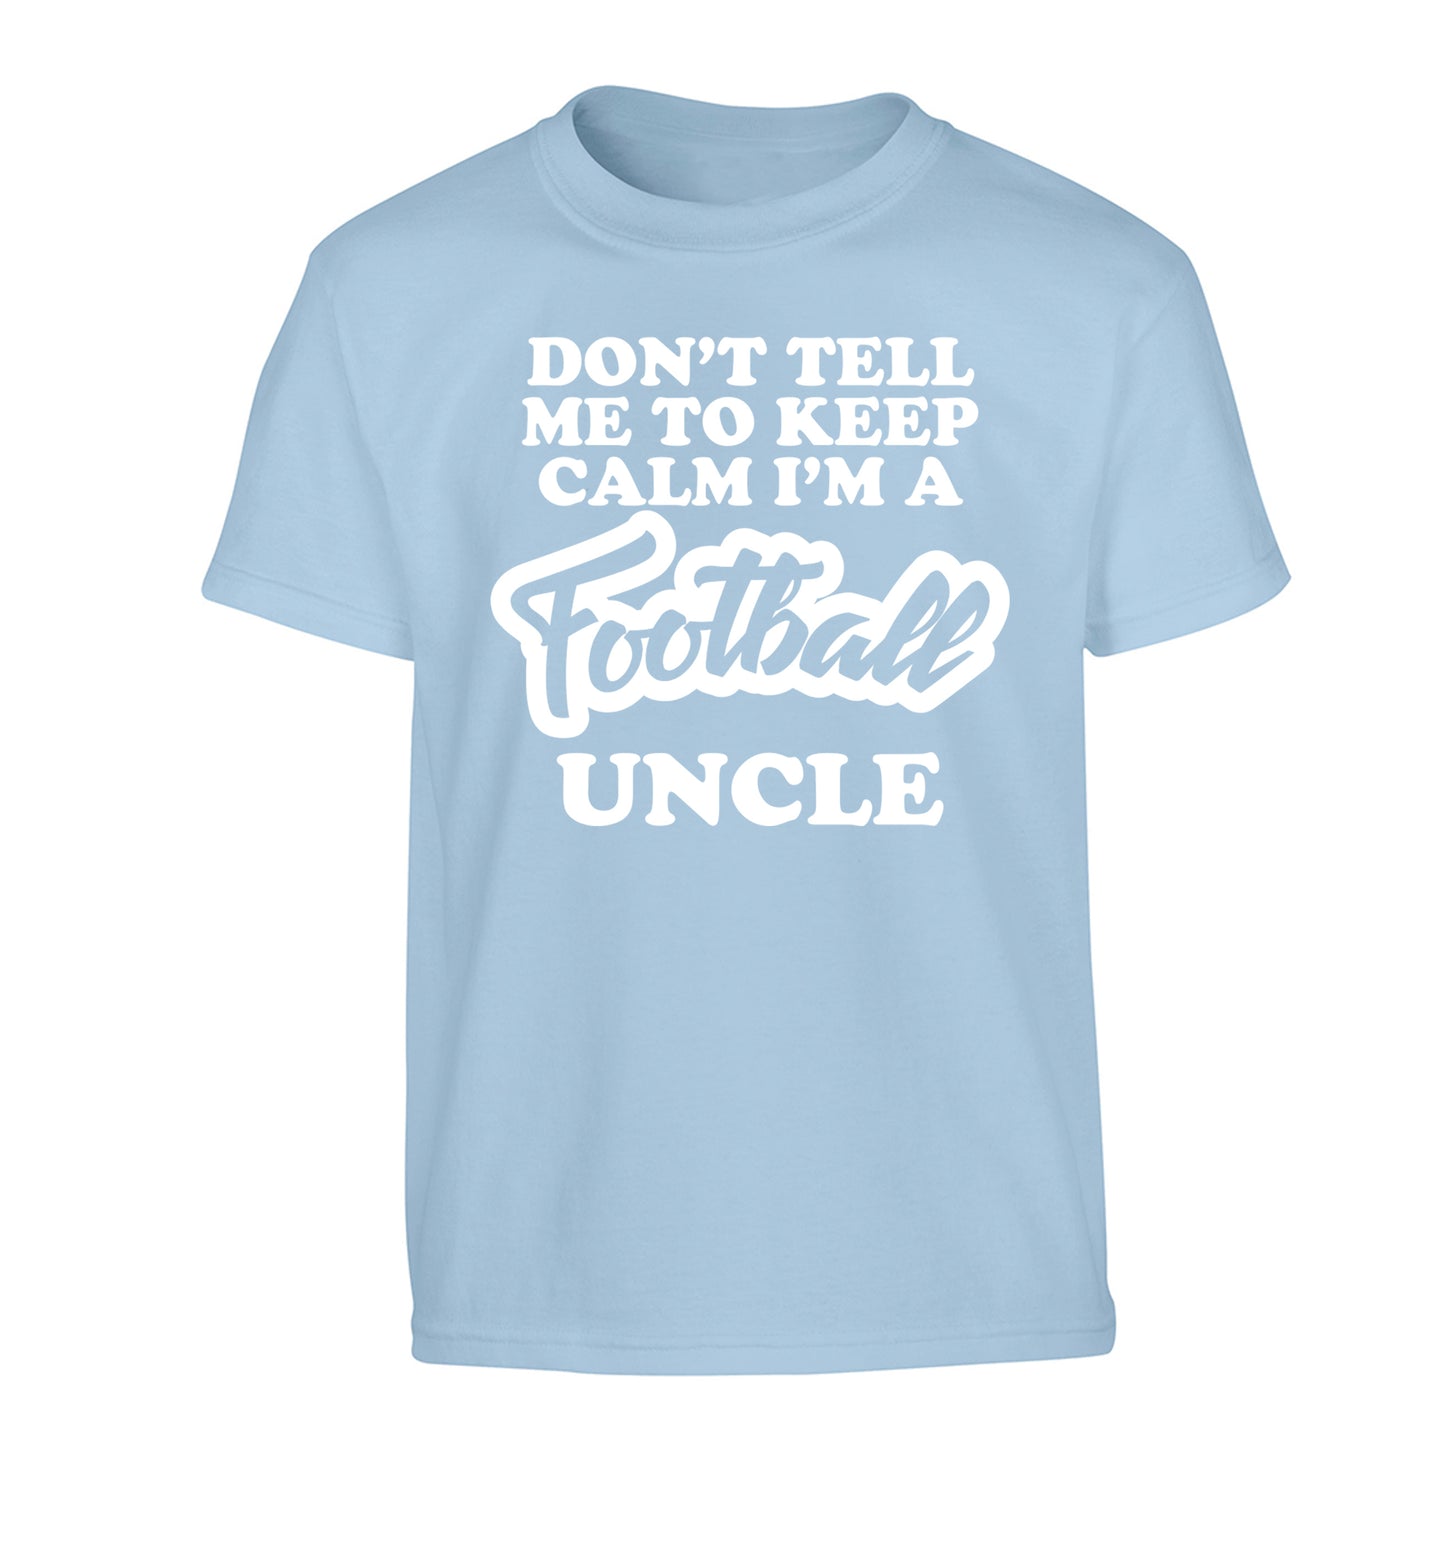 Worlds most amazing football uncle Children's light blue Tshirt 12-14 Years